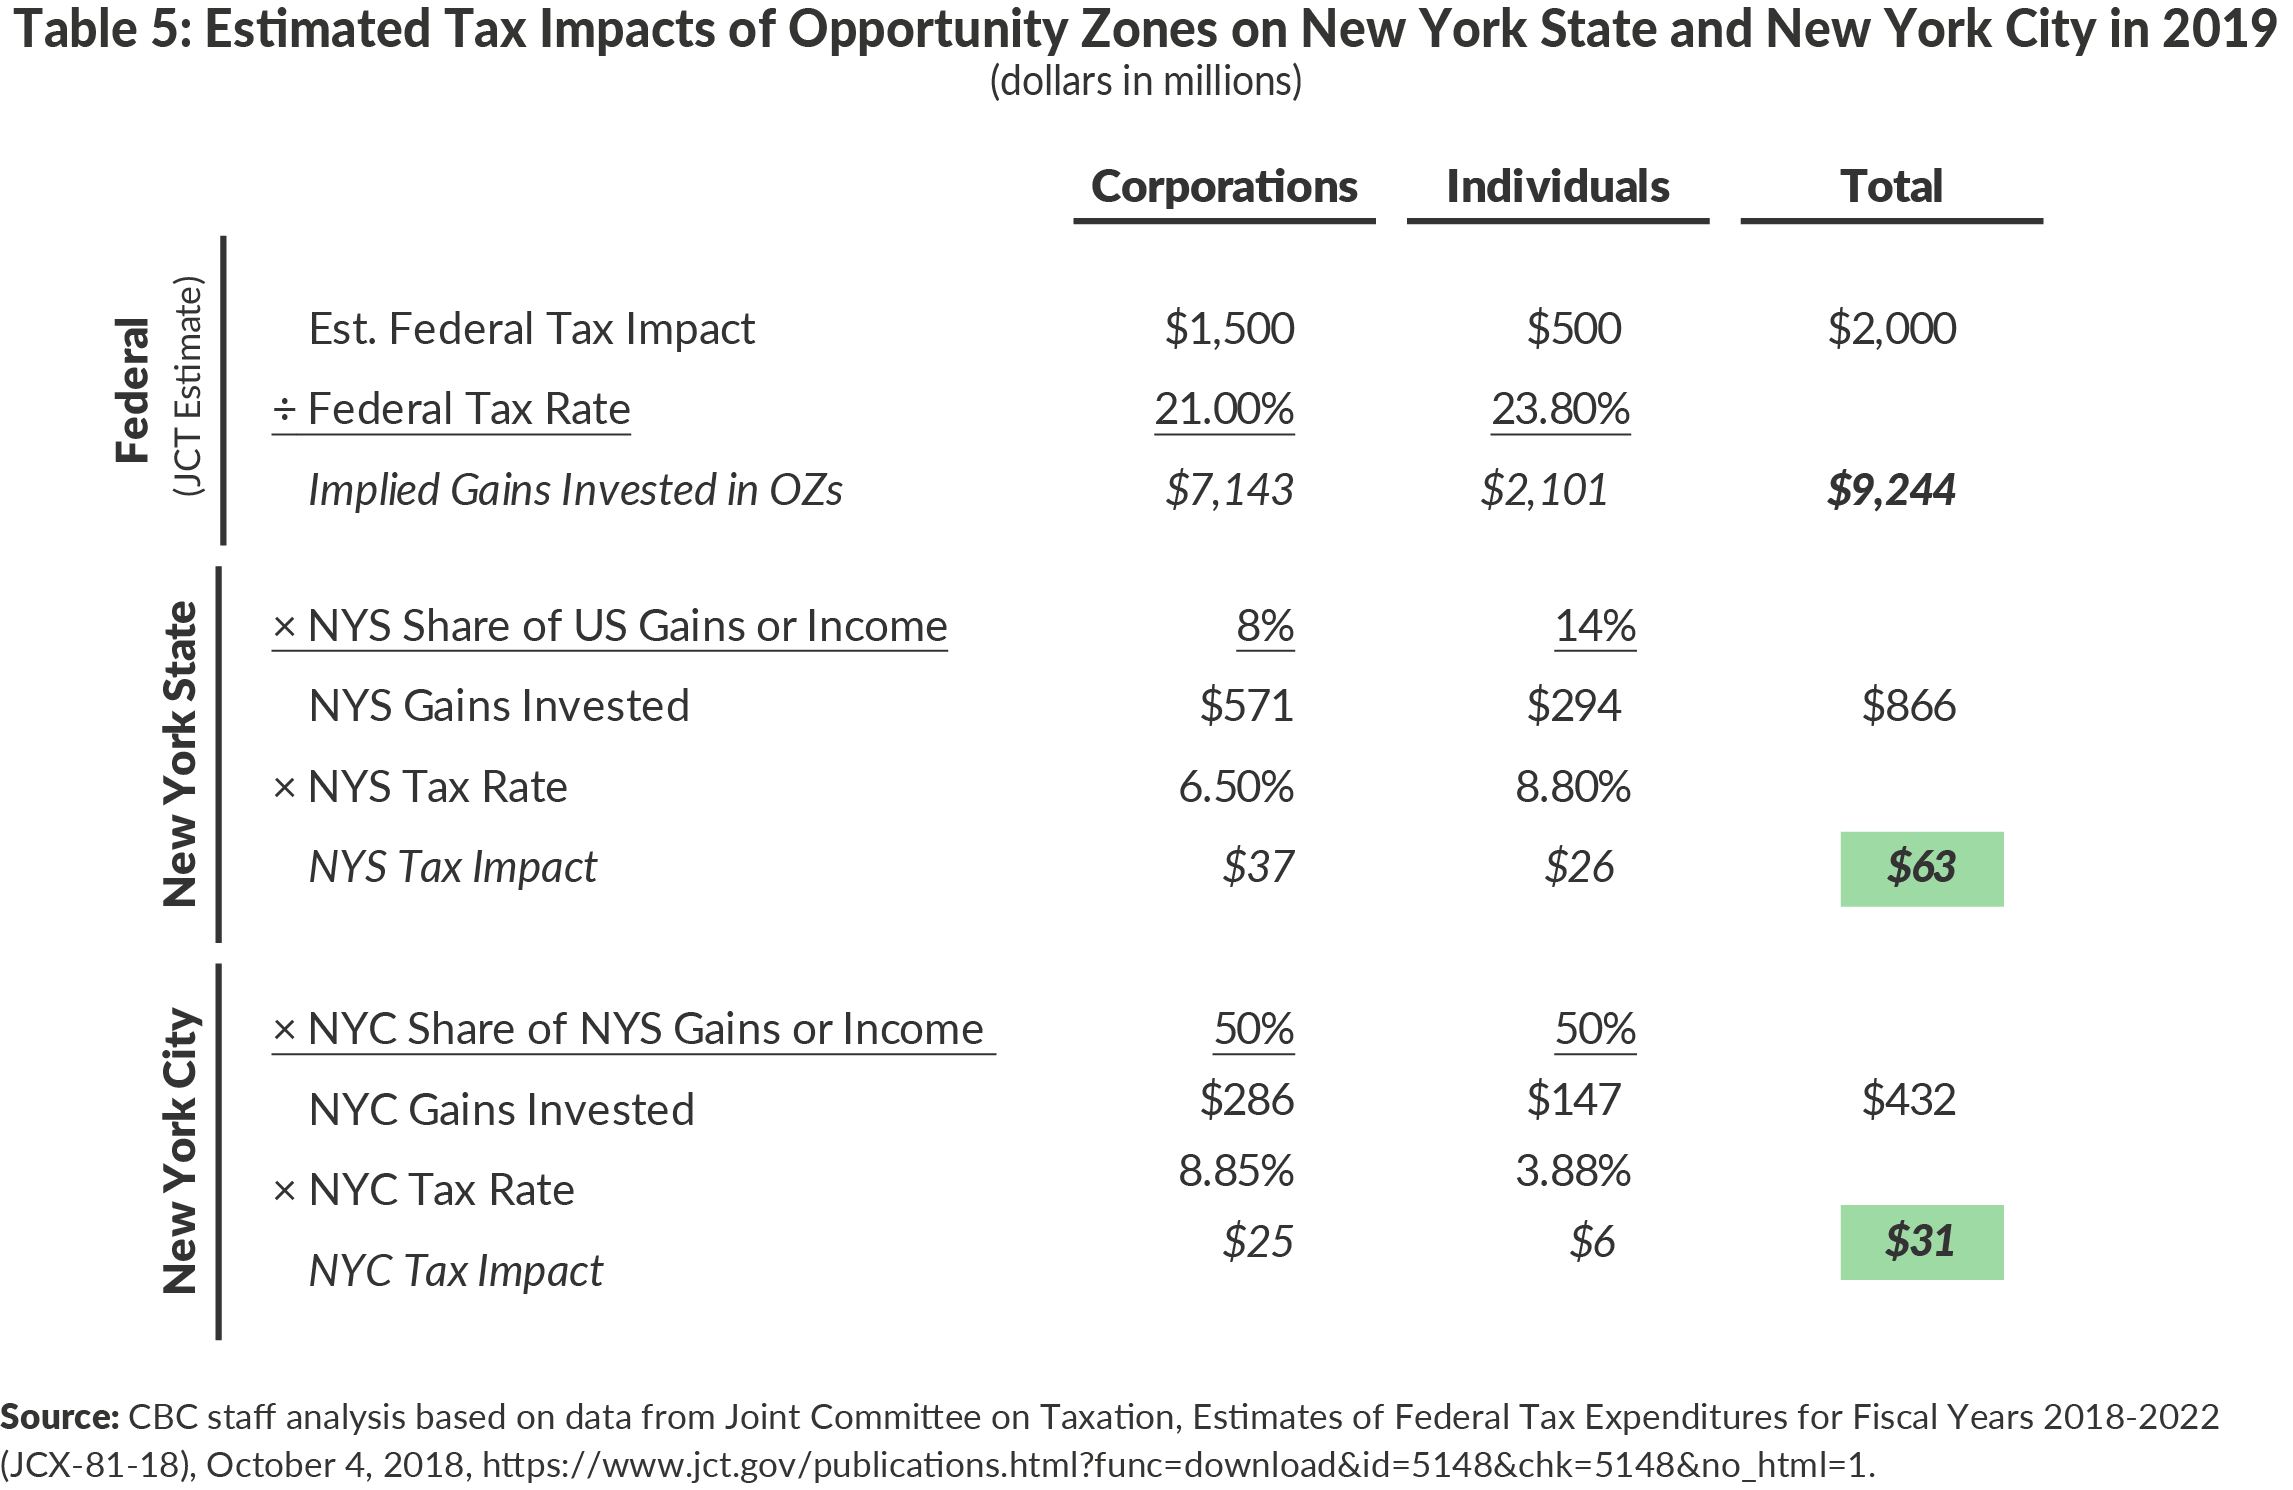 Table 5. Estimated Tax Impacts of Opportunity Zones on New York State and New York City in 2019